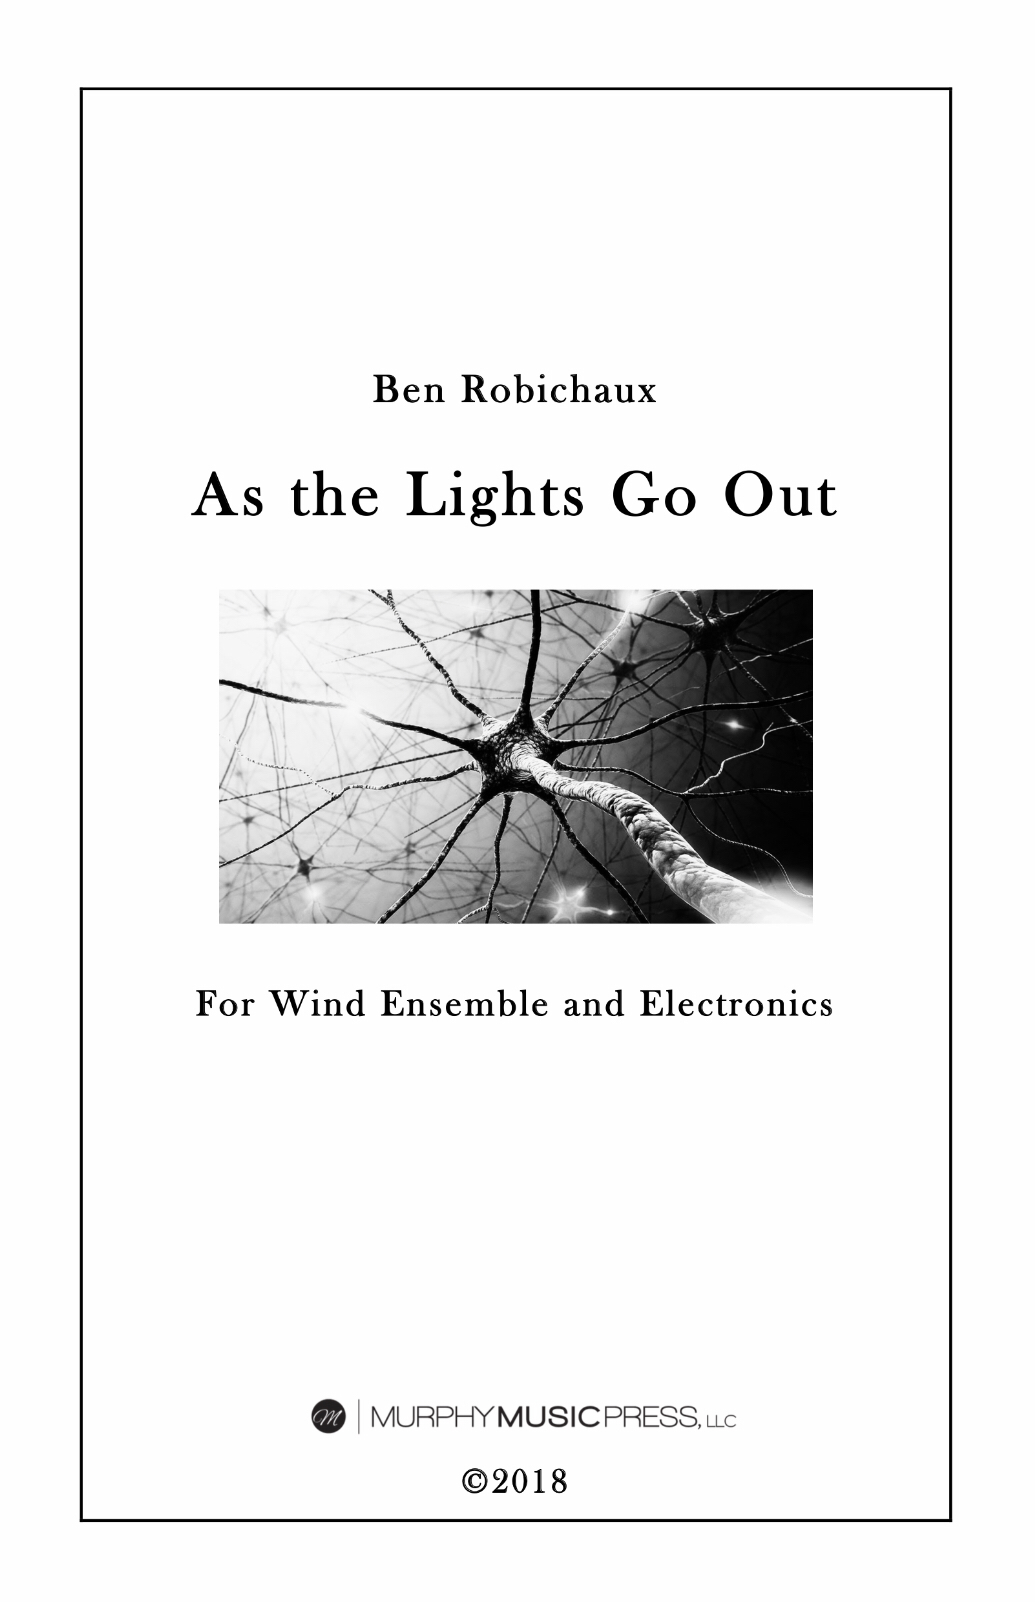 As The Lights Go Out (Score Only) by Ben Robichaux